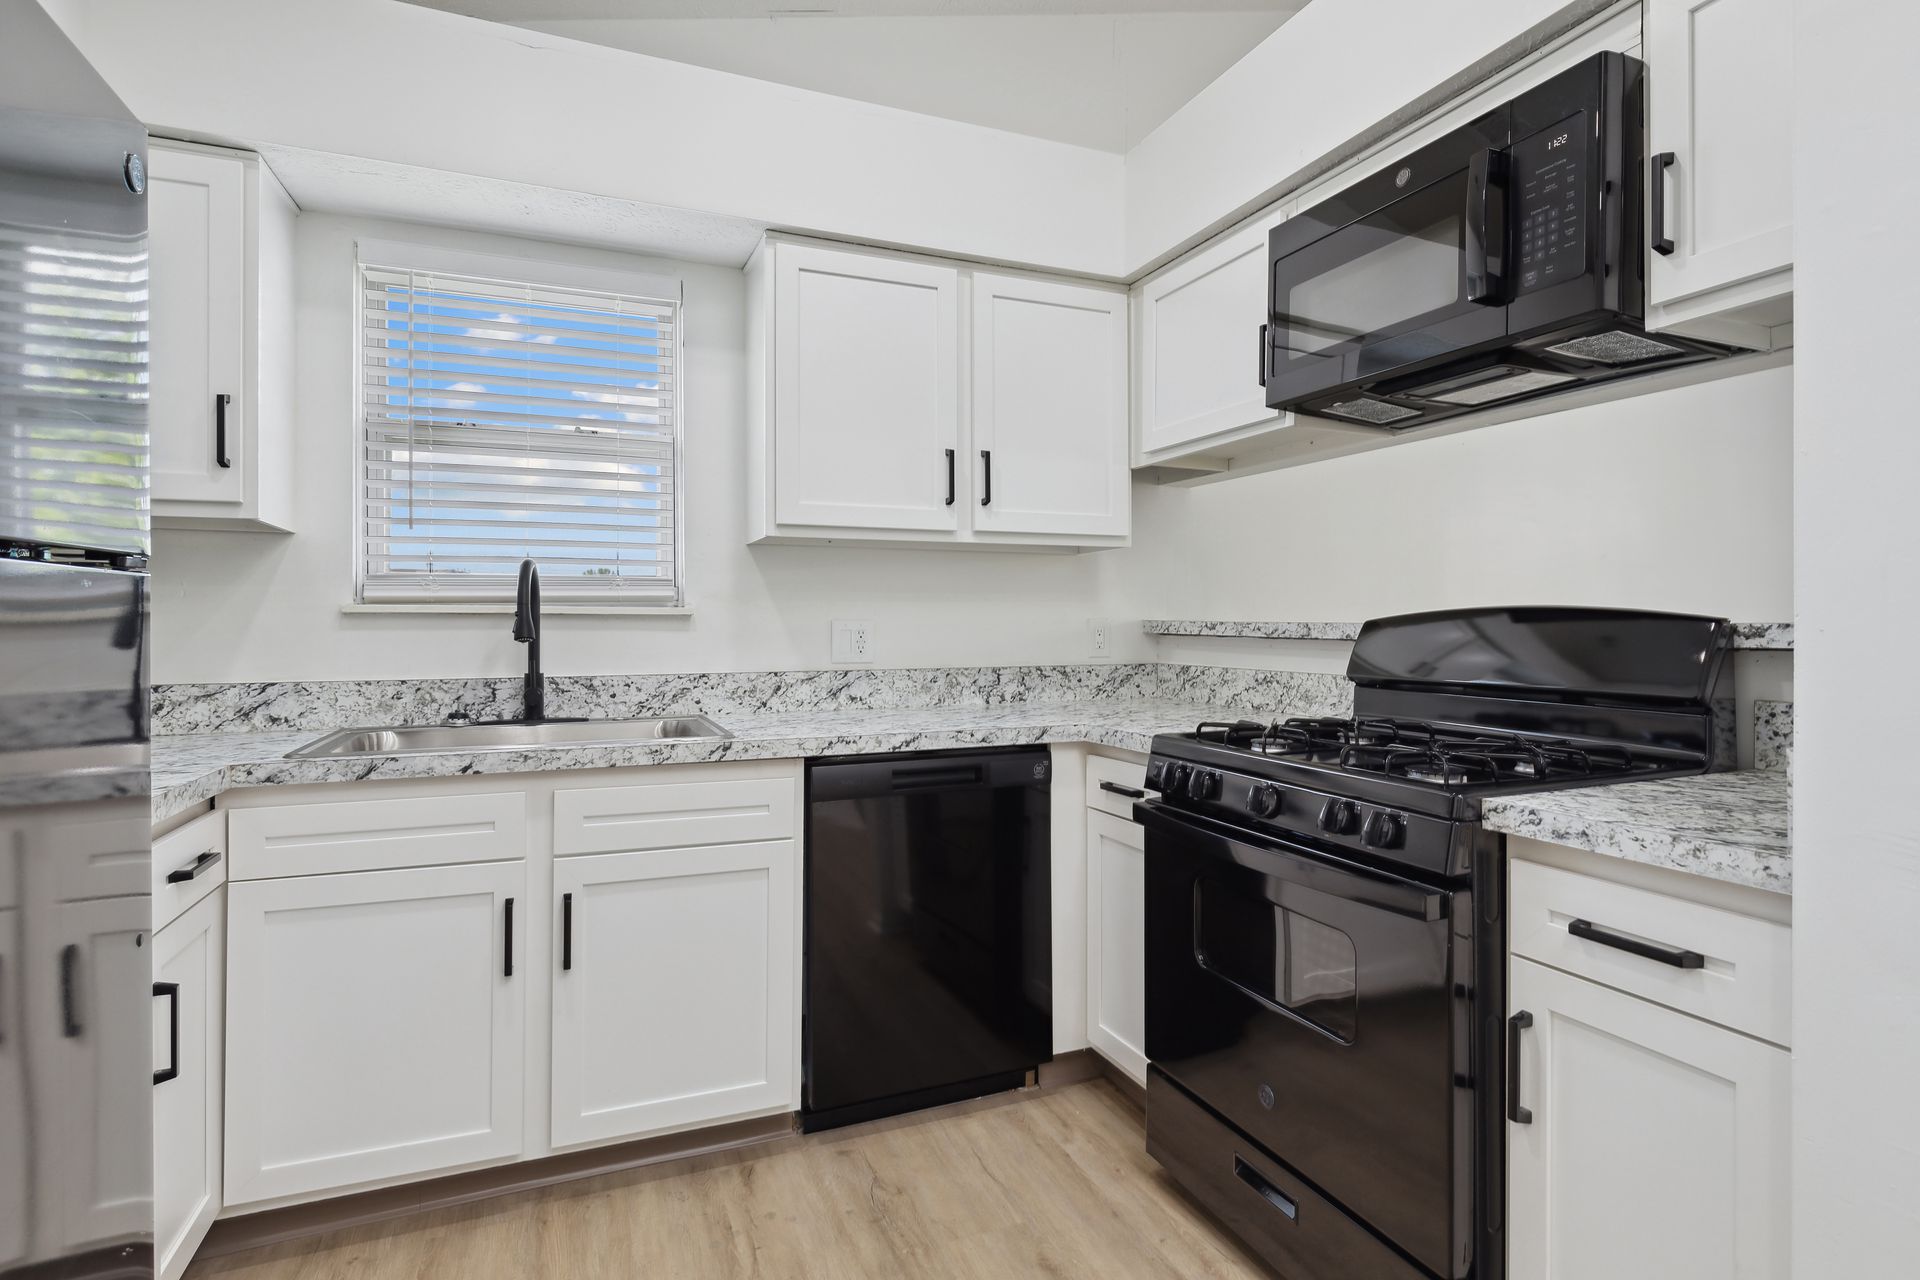 Aspire apartment kitchen with white cabinets, a black stove, a black microwave, and a sink.